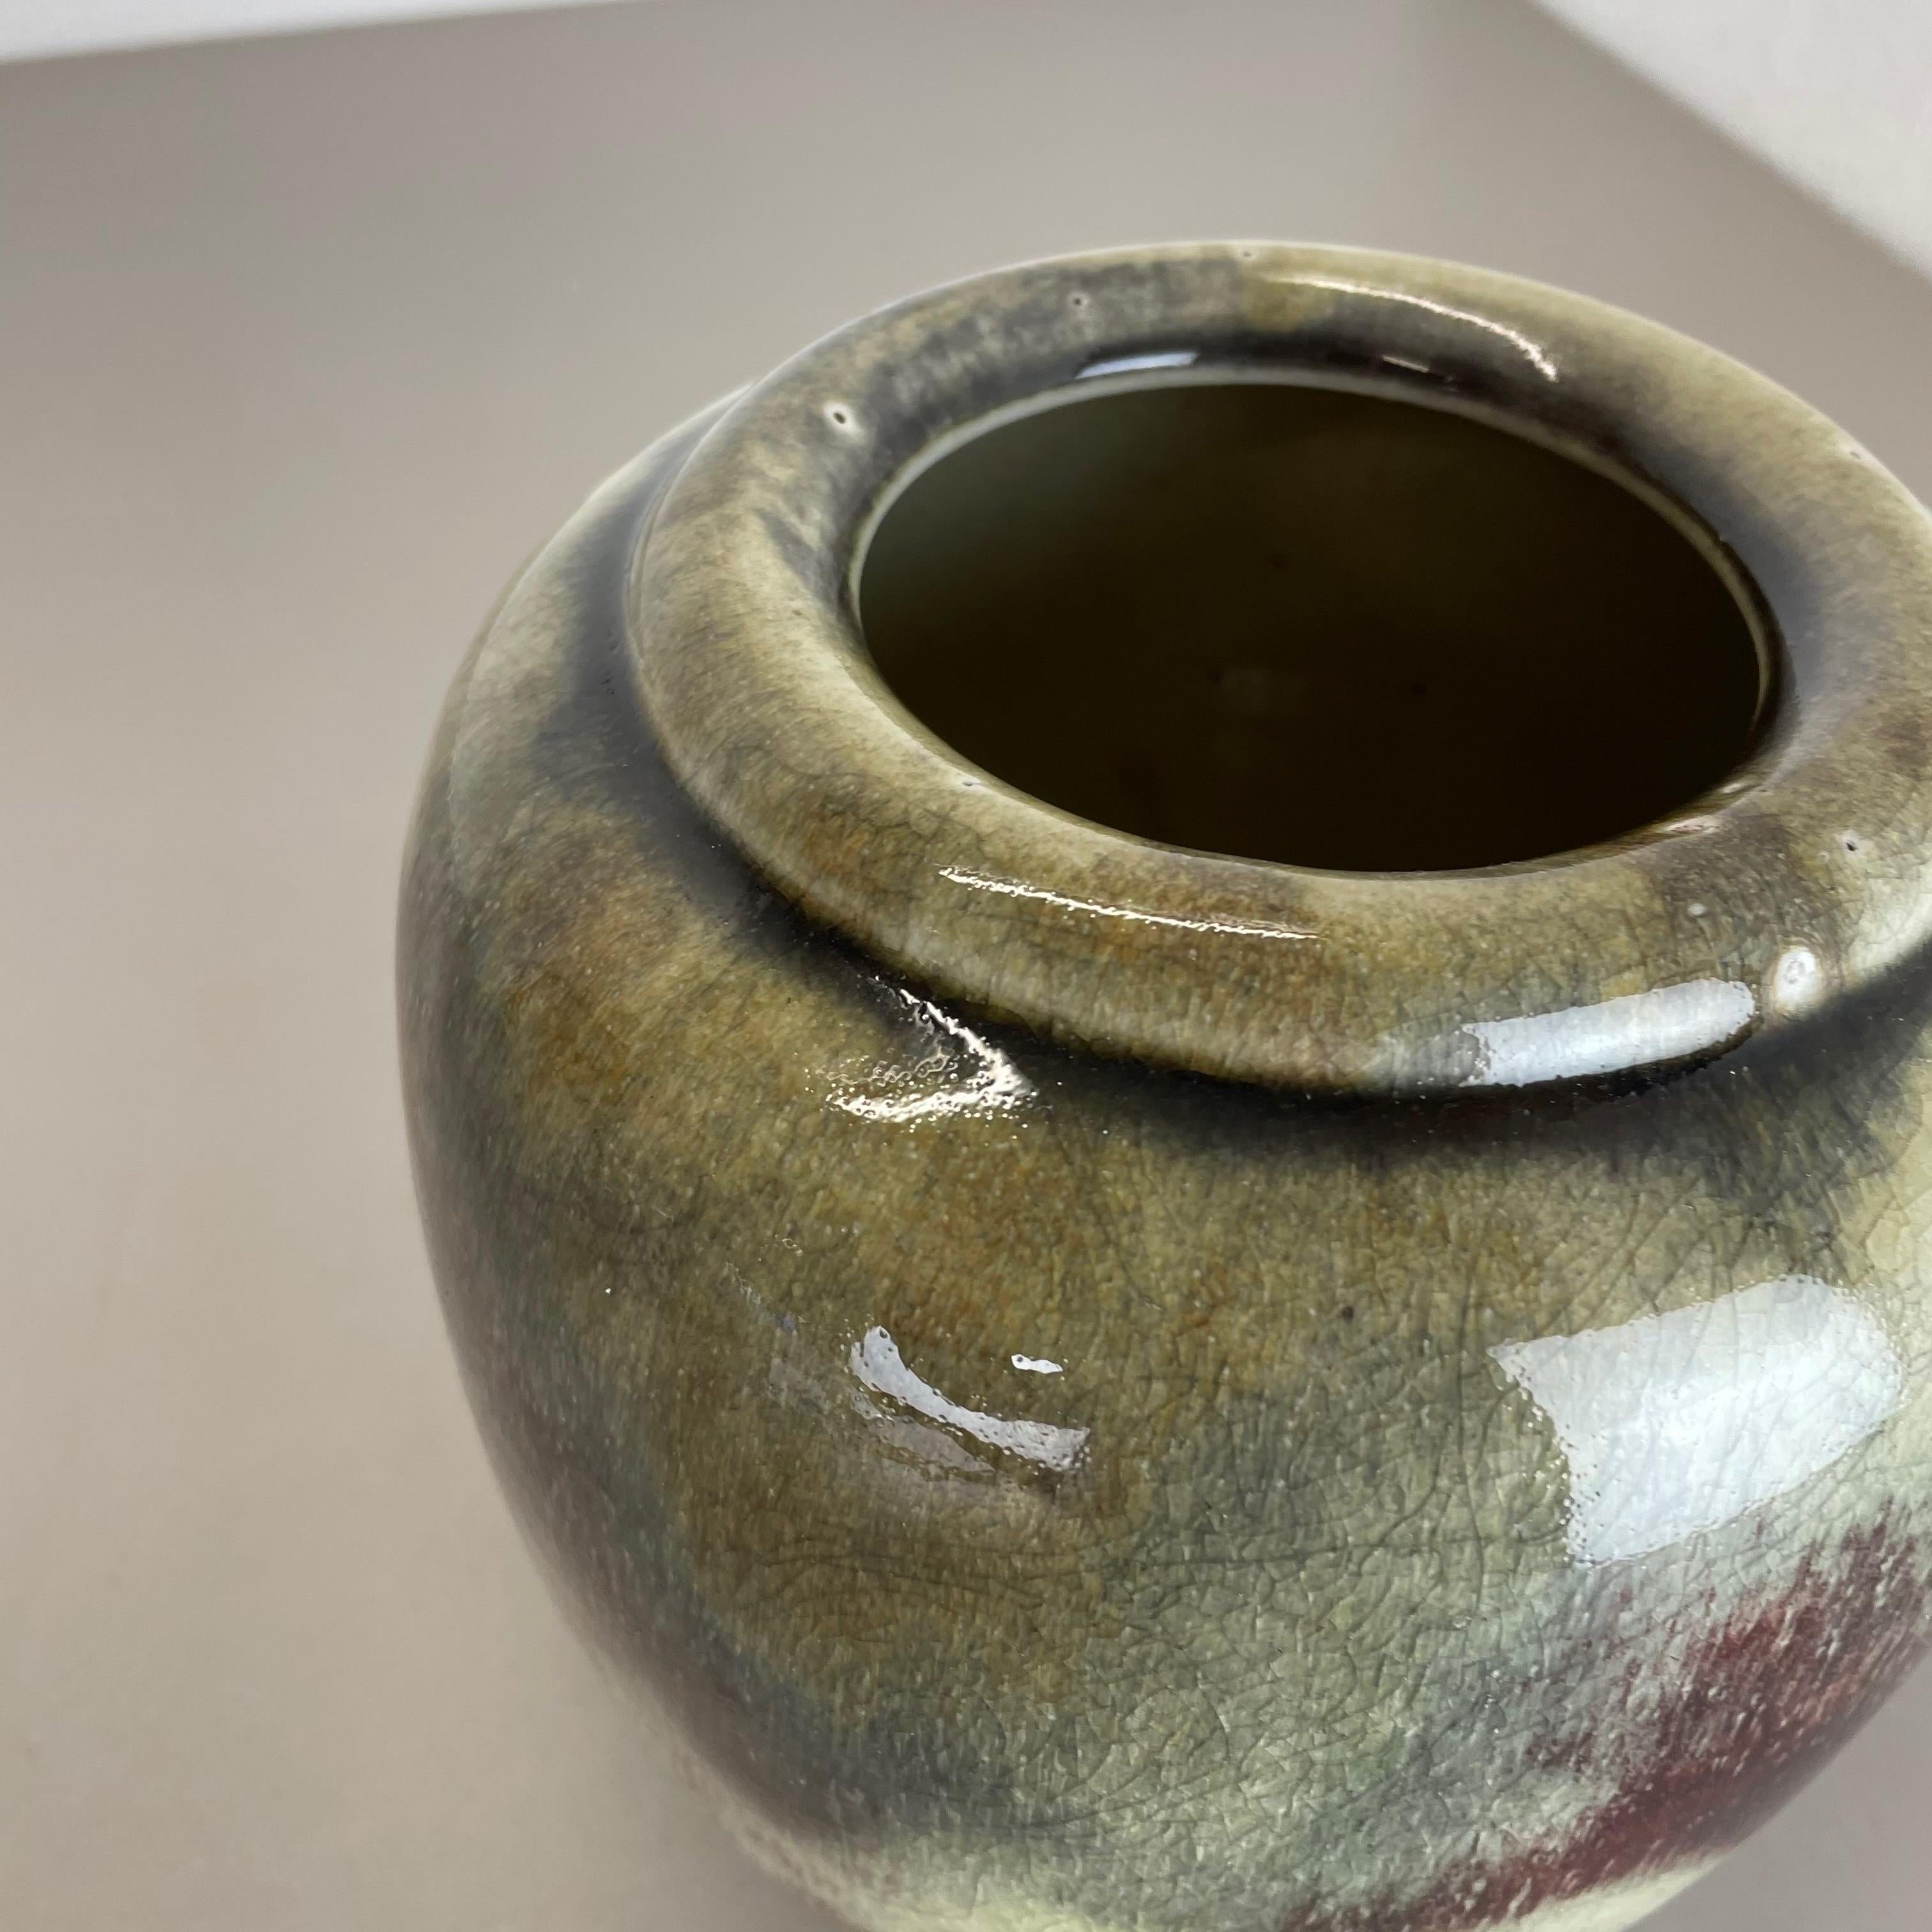 Unique Abstract Bauhaus Vase Pottery by WMF Ikora, Germany 1930s Art Deco In Good Condition For Sale In Kirchlengern, DE